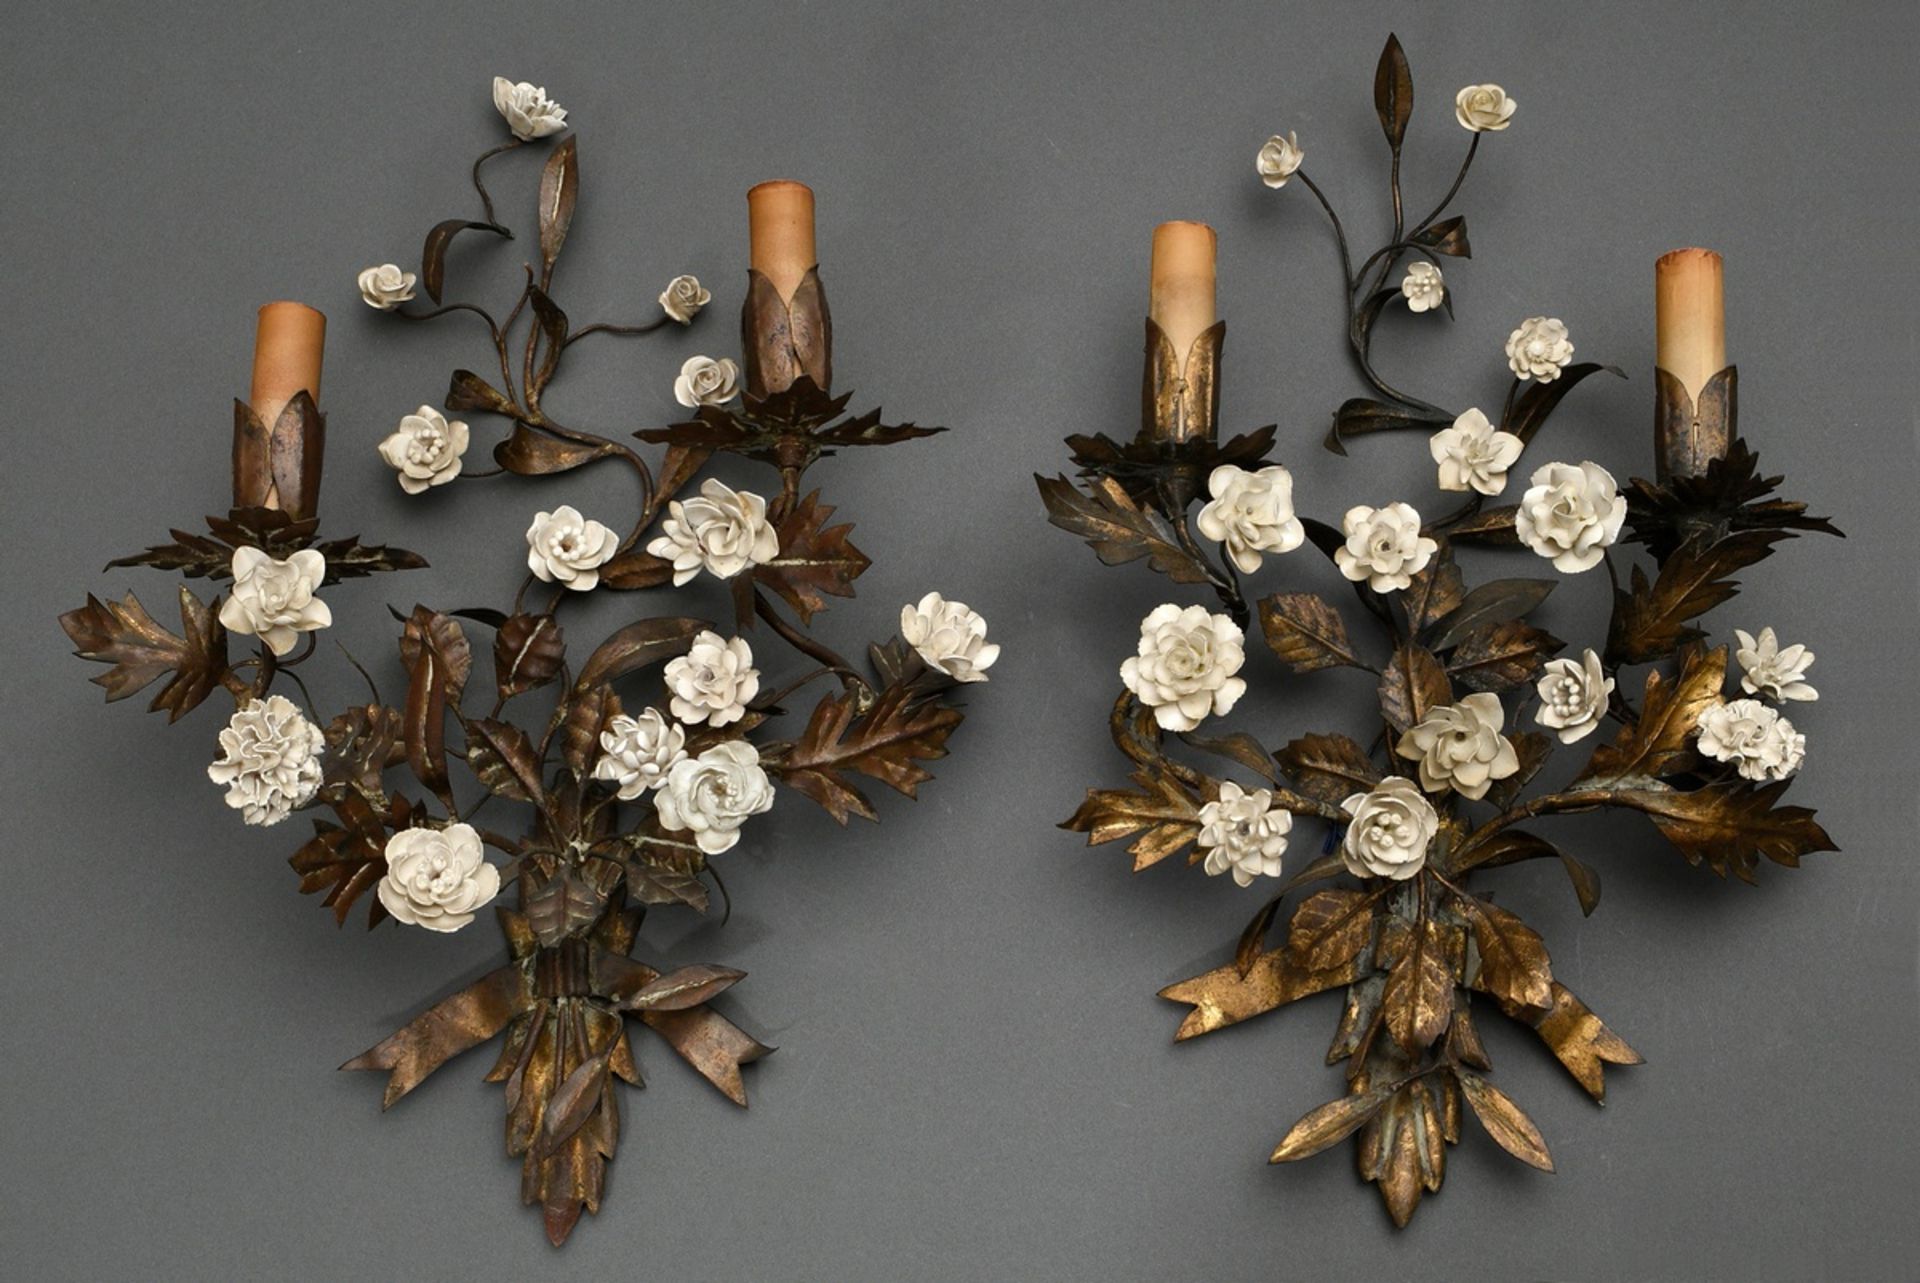 Pair of Italian wall arms in floral façon with porcelain blossoms, sheet brass with remnants of gil